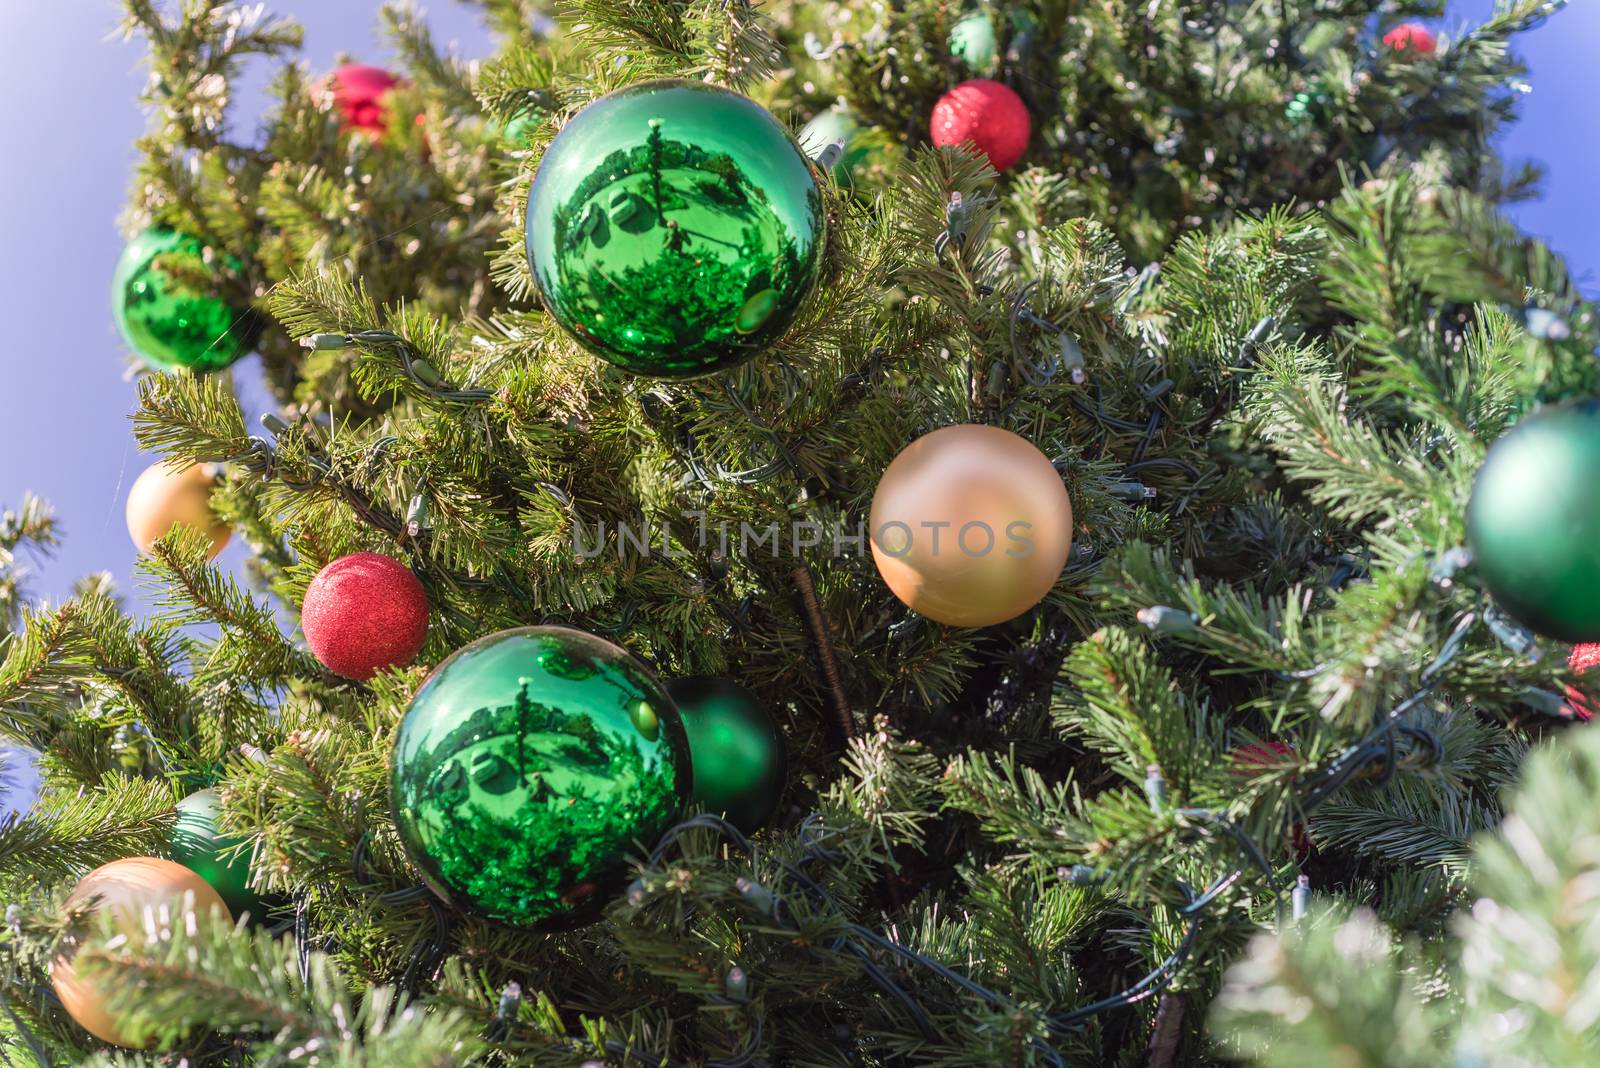 Green ball ornament hanging on Christmas pine branches at daytime light close-up by trongnguyen